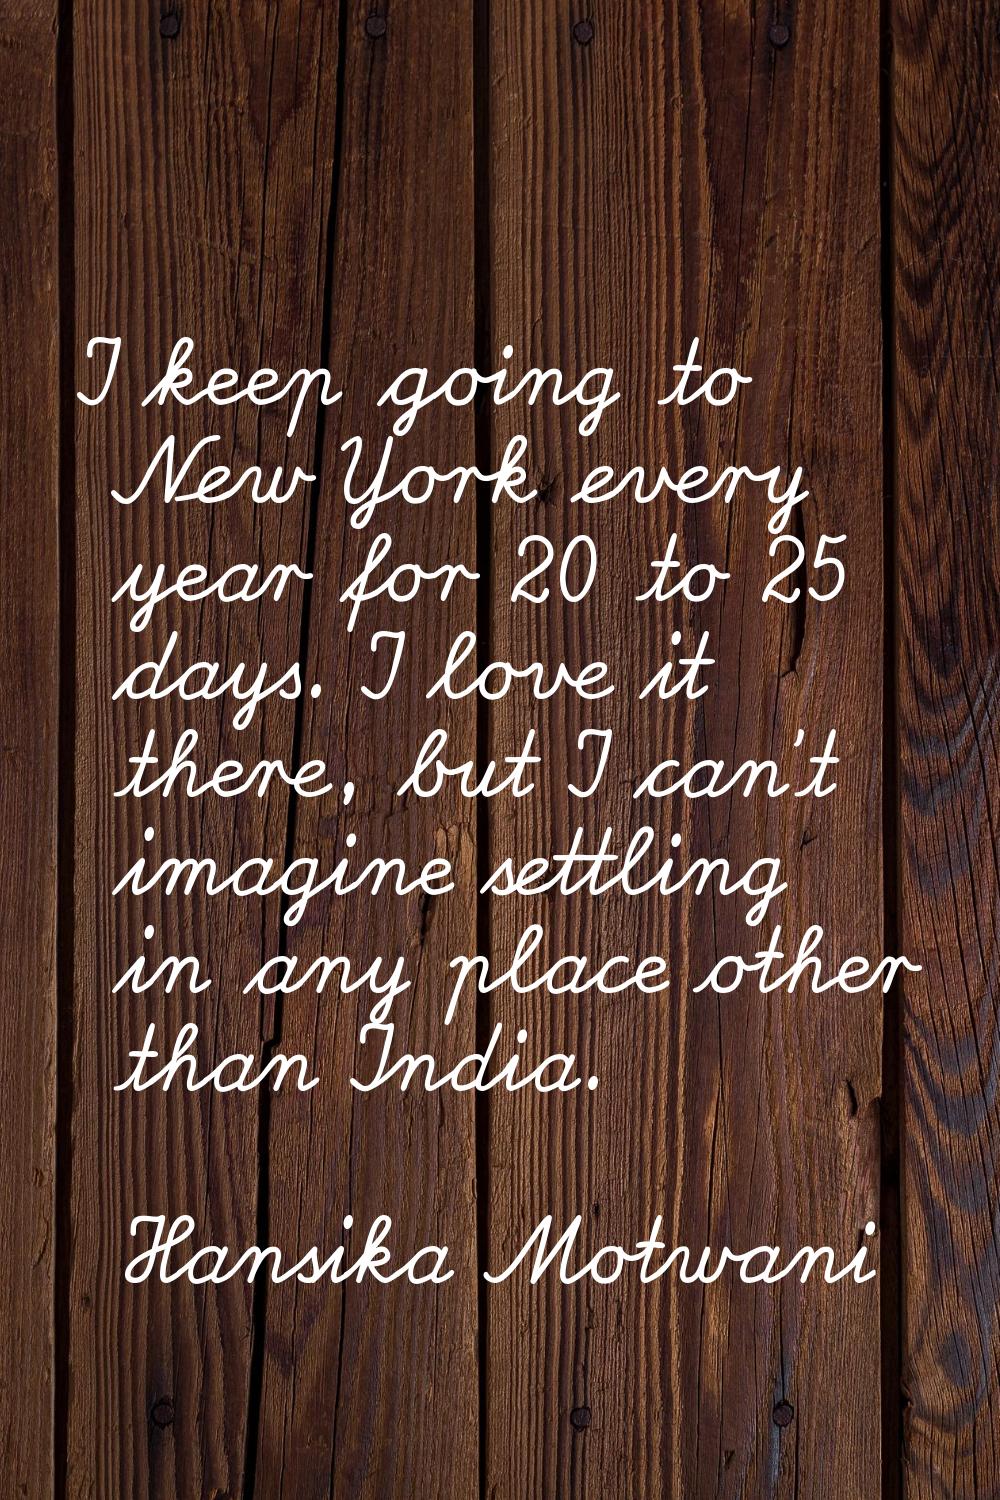 I keep going to New York every year for 20 to 25 days. I love it there, but I can't imagine settlin